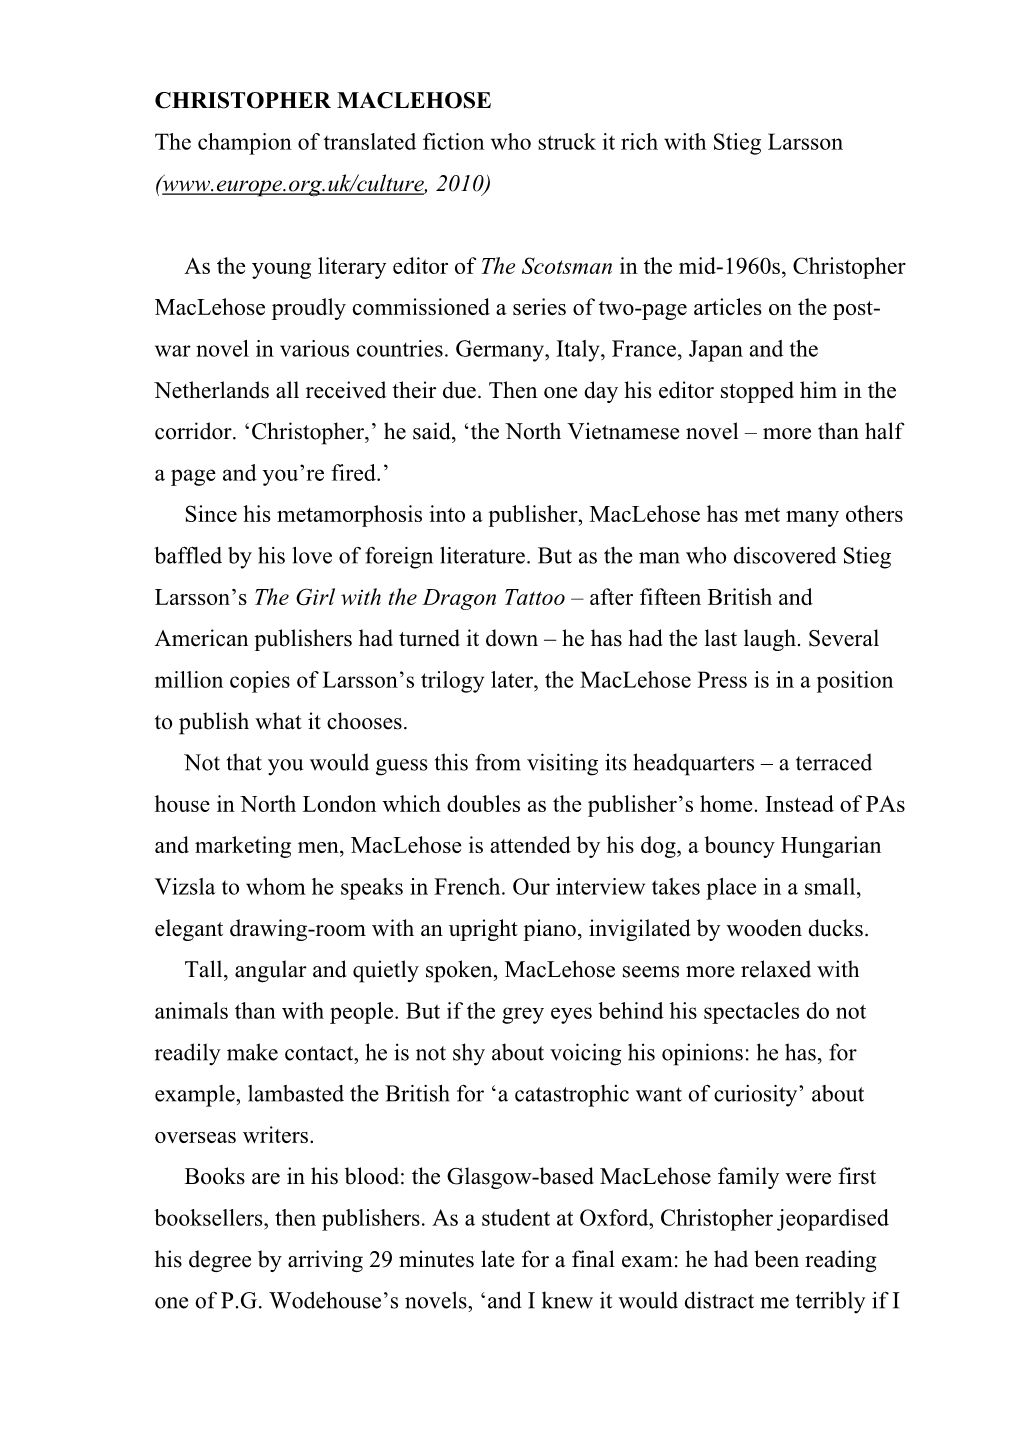 CHRISTOPHER MACLEHOSE the Champion of Translated Fiction Who Struck It Rich with Stieg Larsson ( 2010)